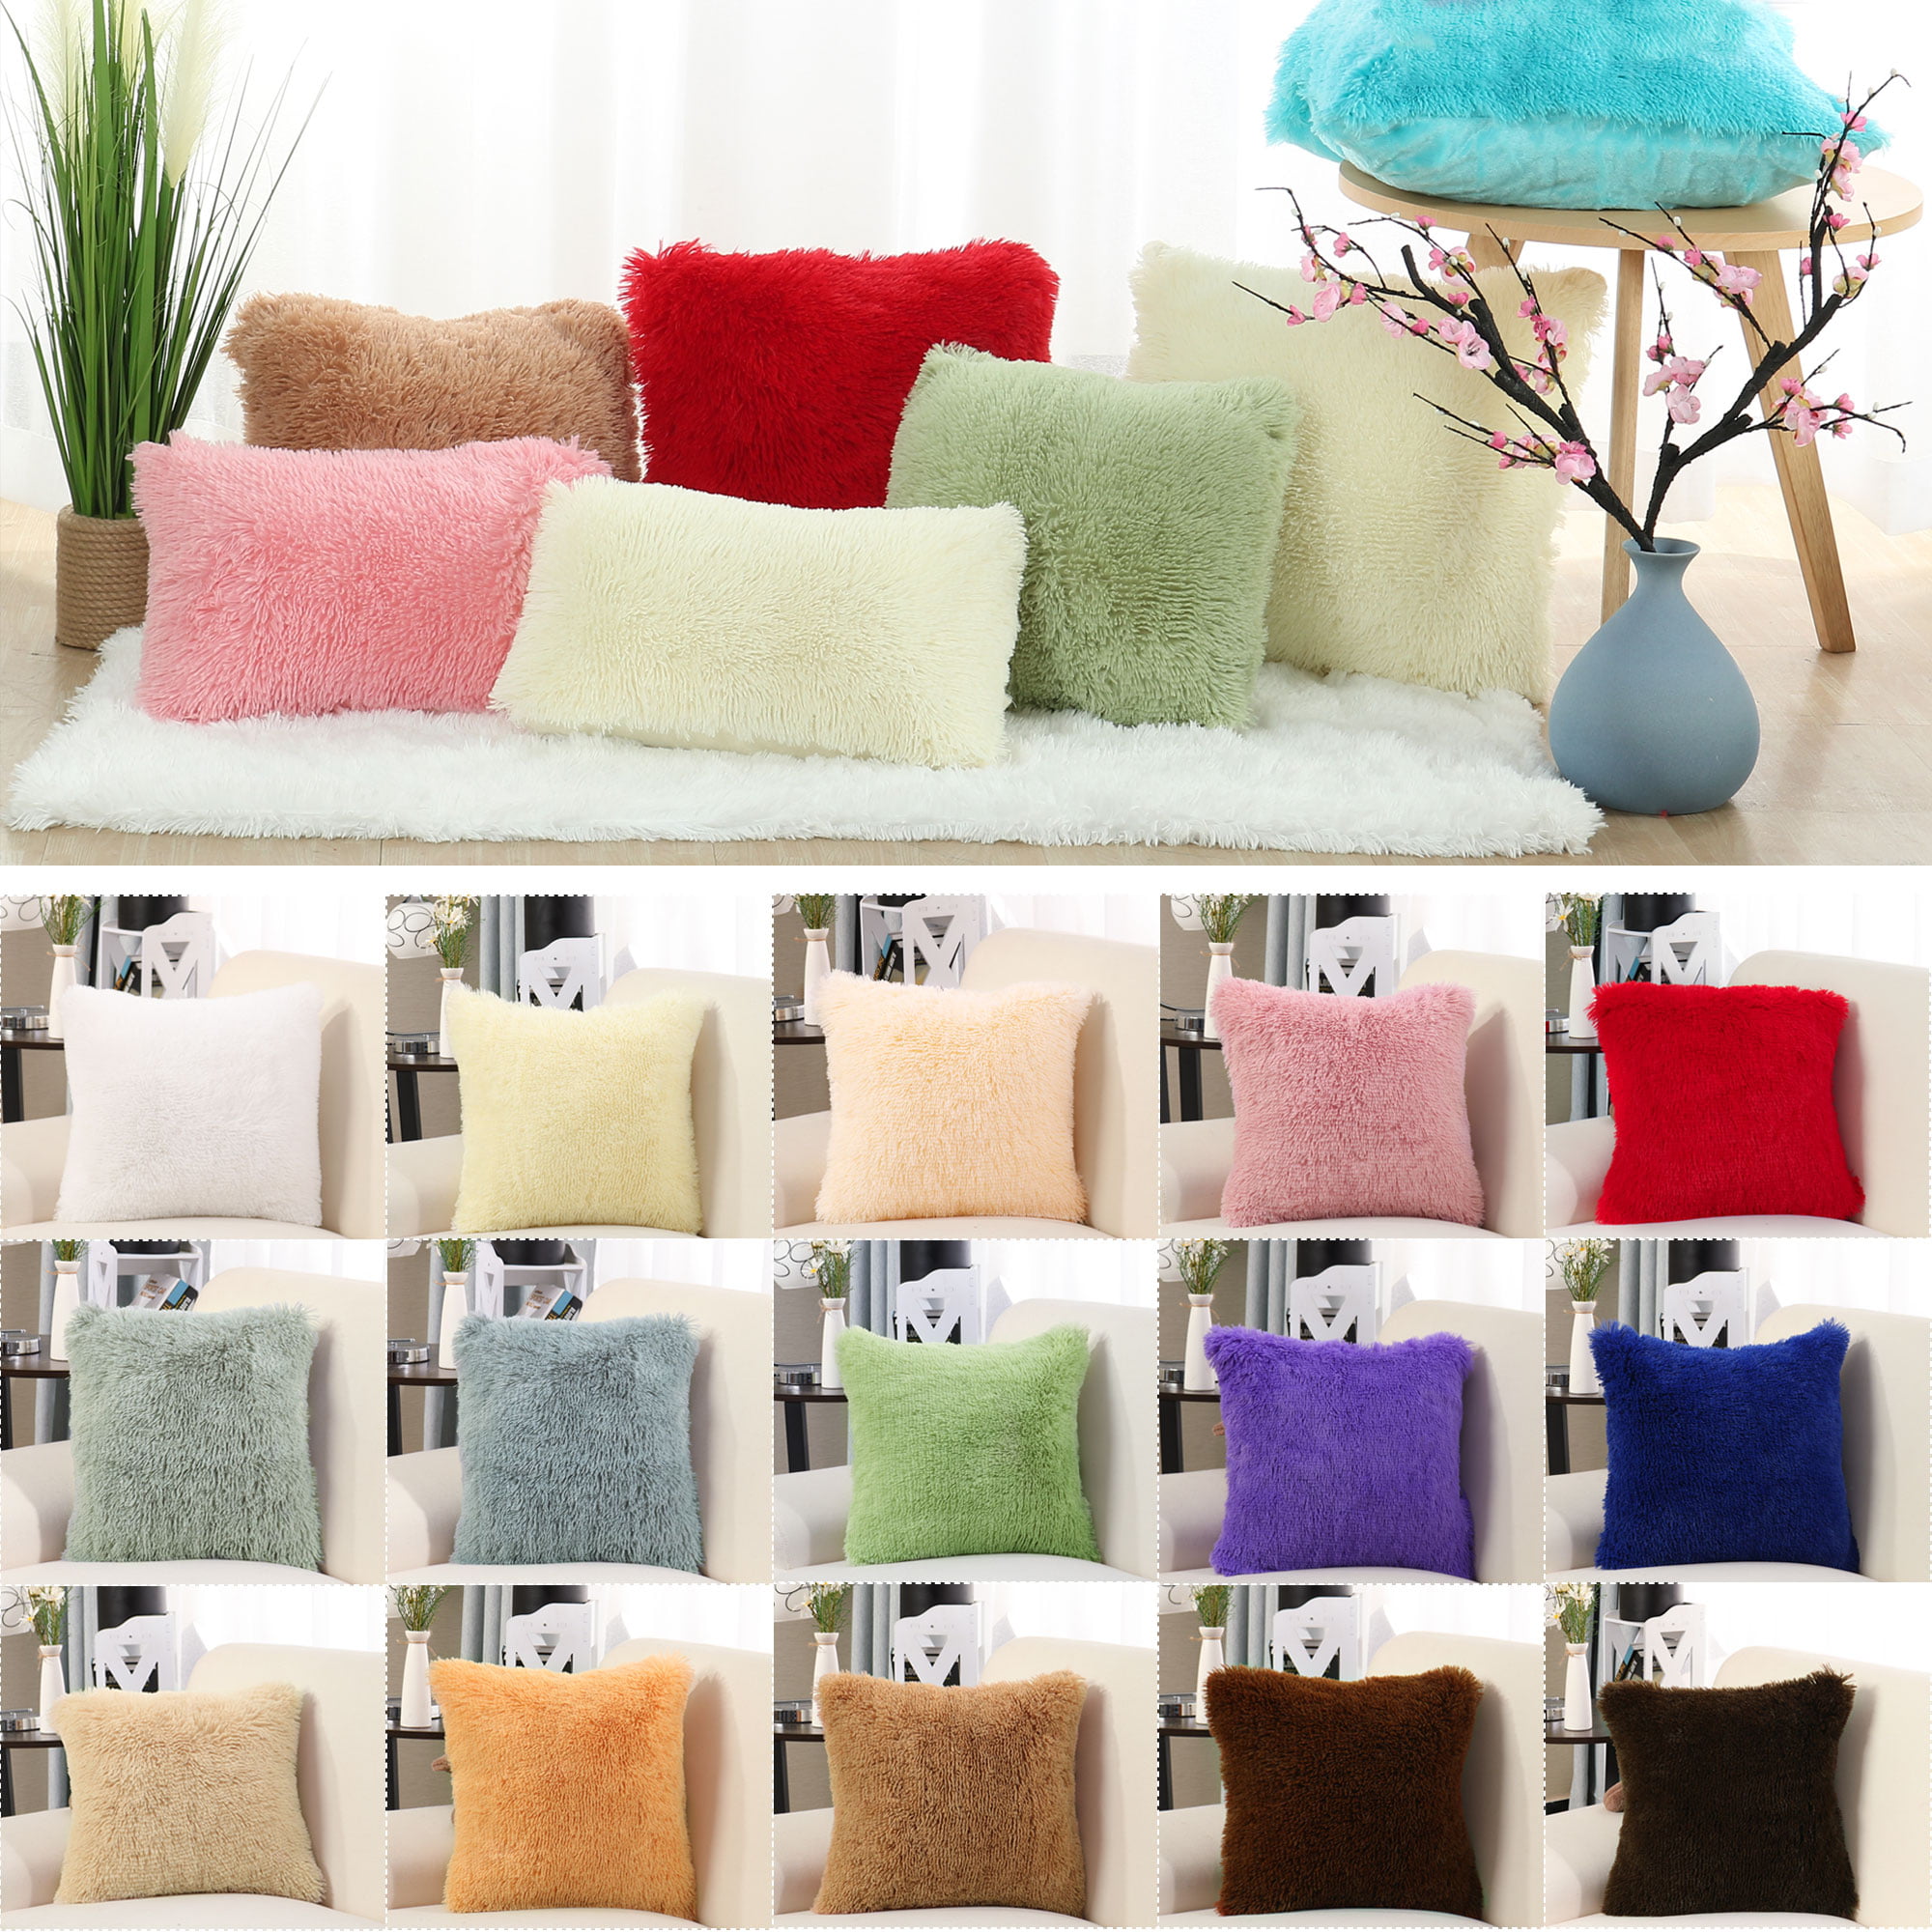 Plush Furry Solid Color Cushion Cover Throw Pillow Case Home Bed Room Sofa Decor 